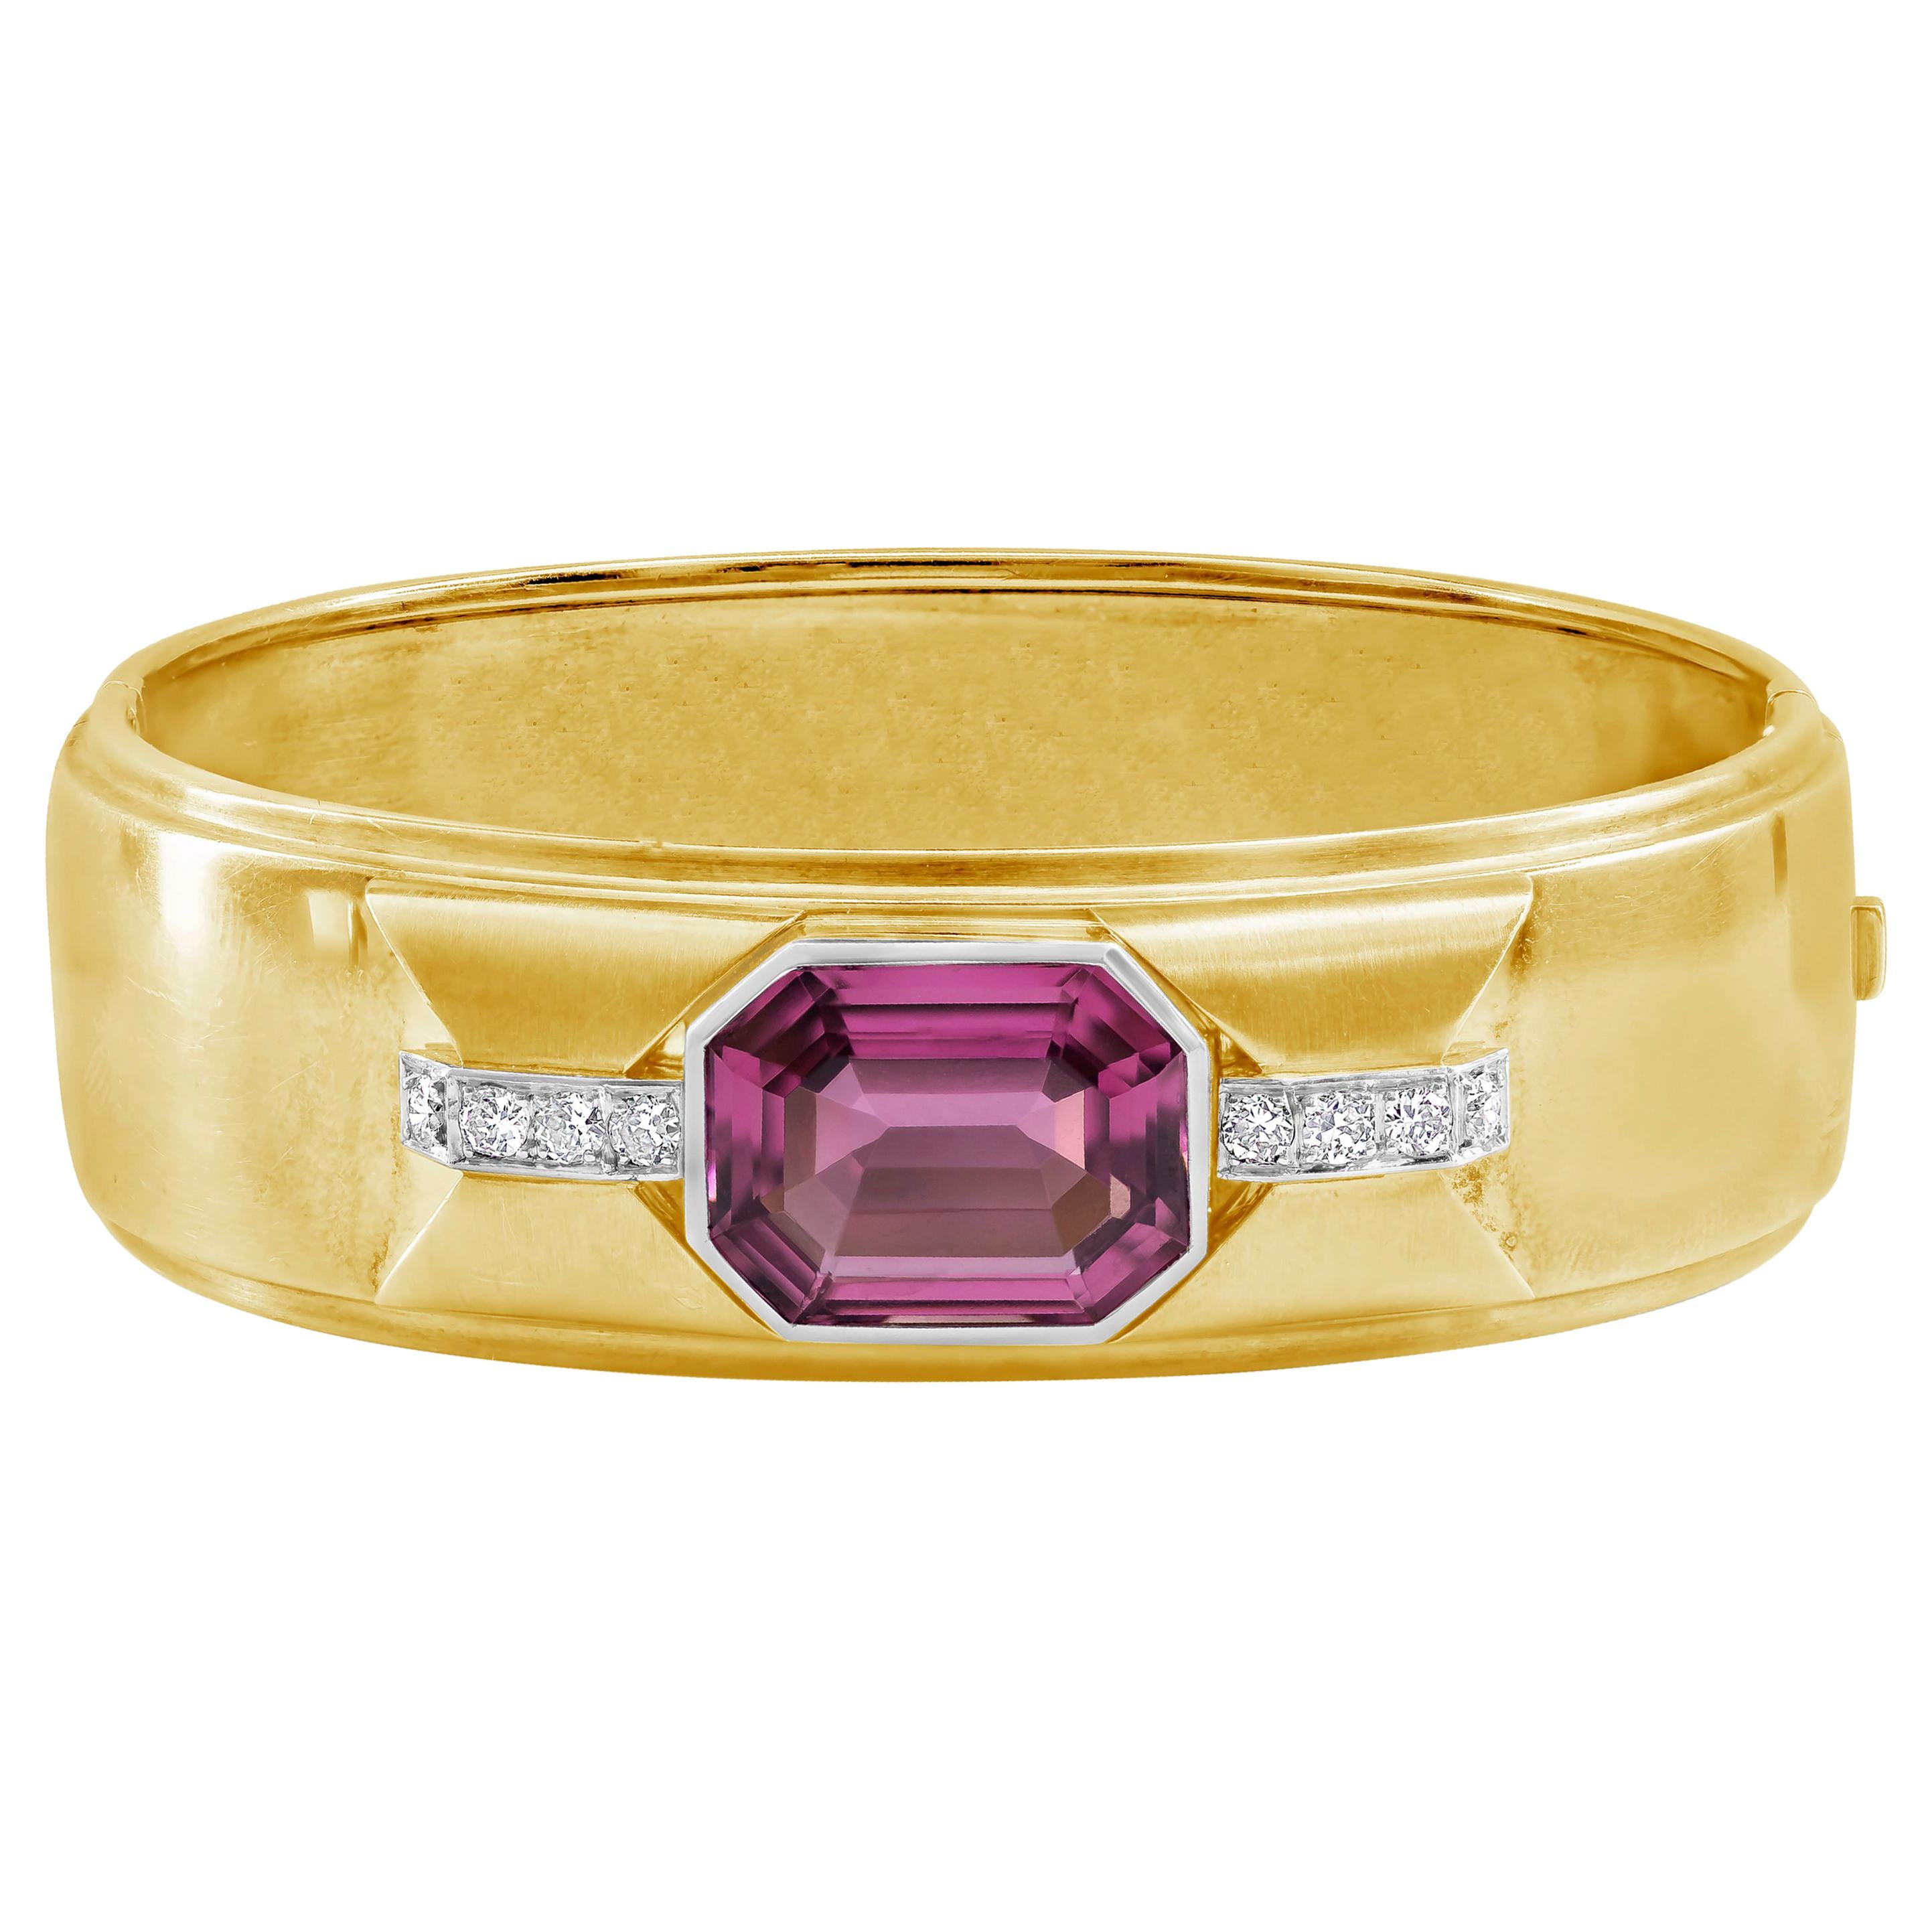 GIA Certified 10.50 Carats Octagon Pink Tourmaline Yellow Gold Bangle Bracelet For Sale